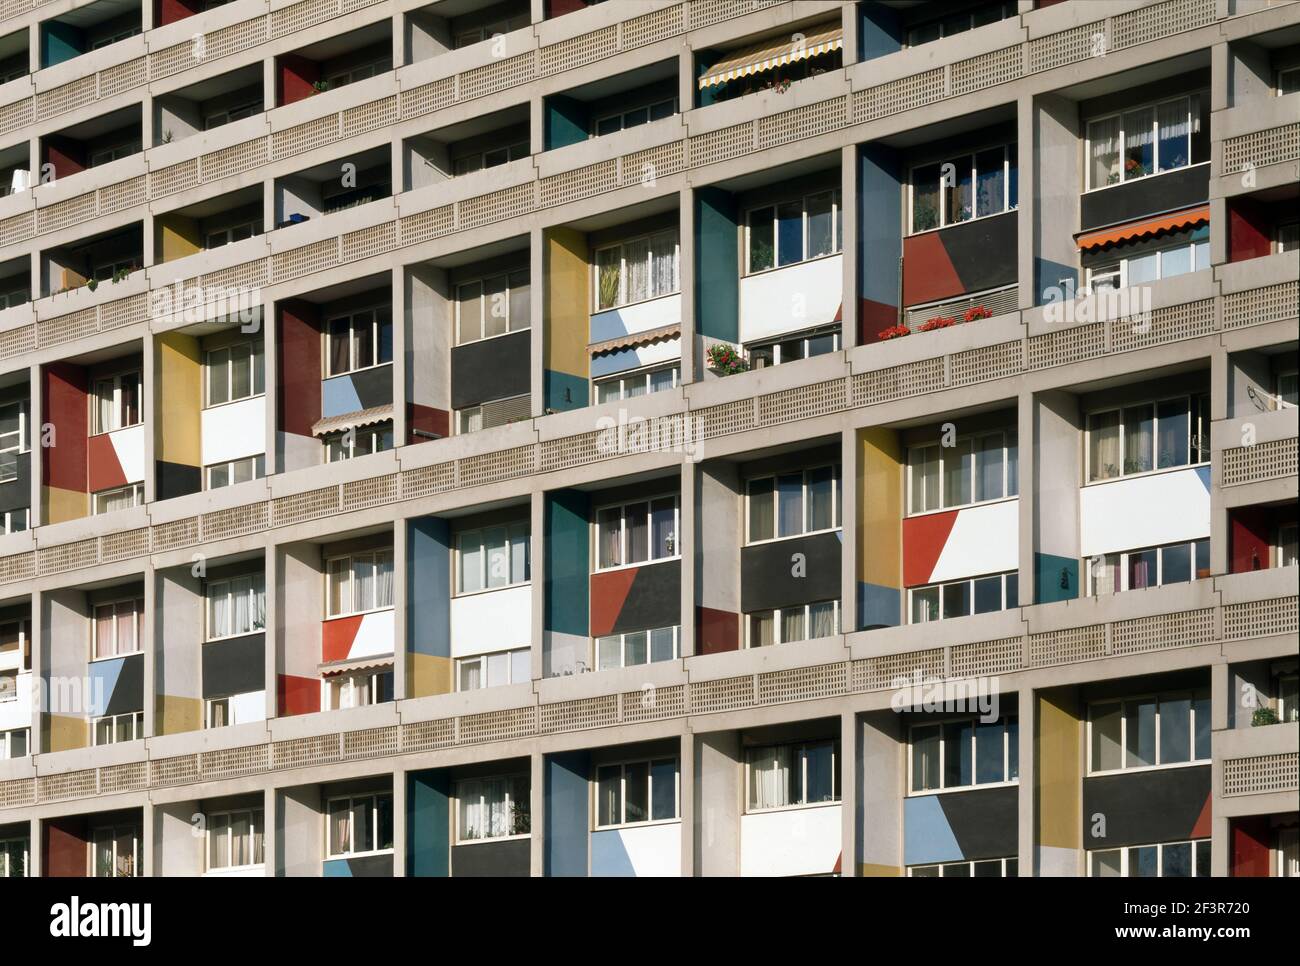 The Corbusier building, in the Berlin district of Charlottenburg-Wilmersdorf, Germany. Stock Photo